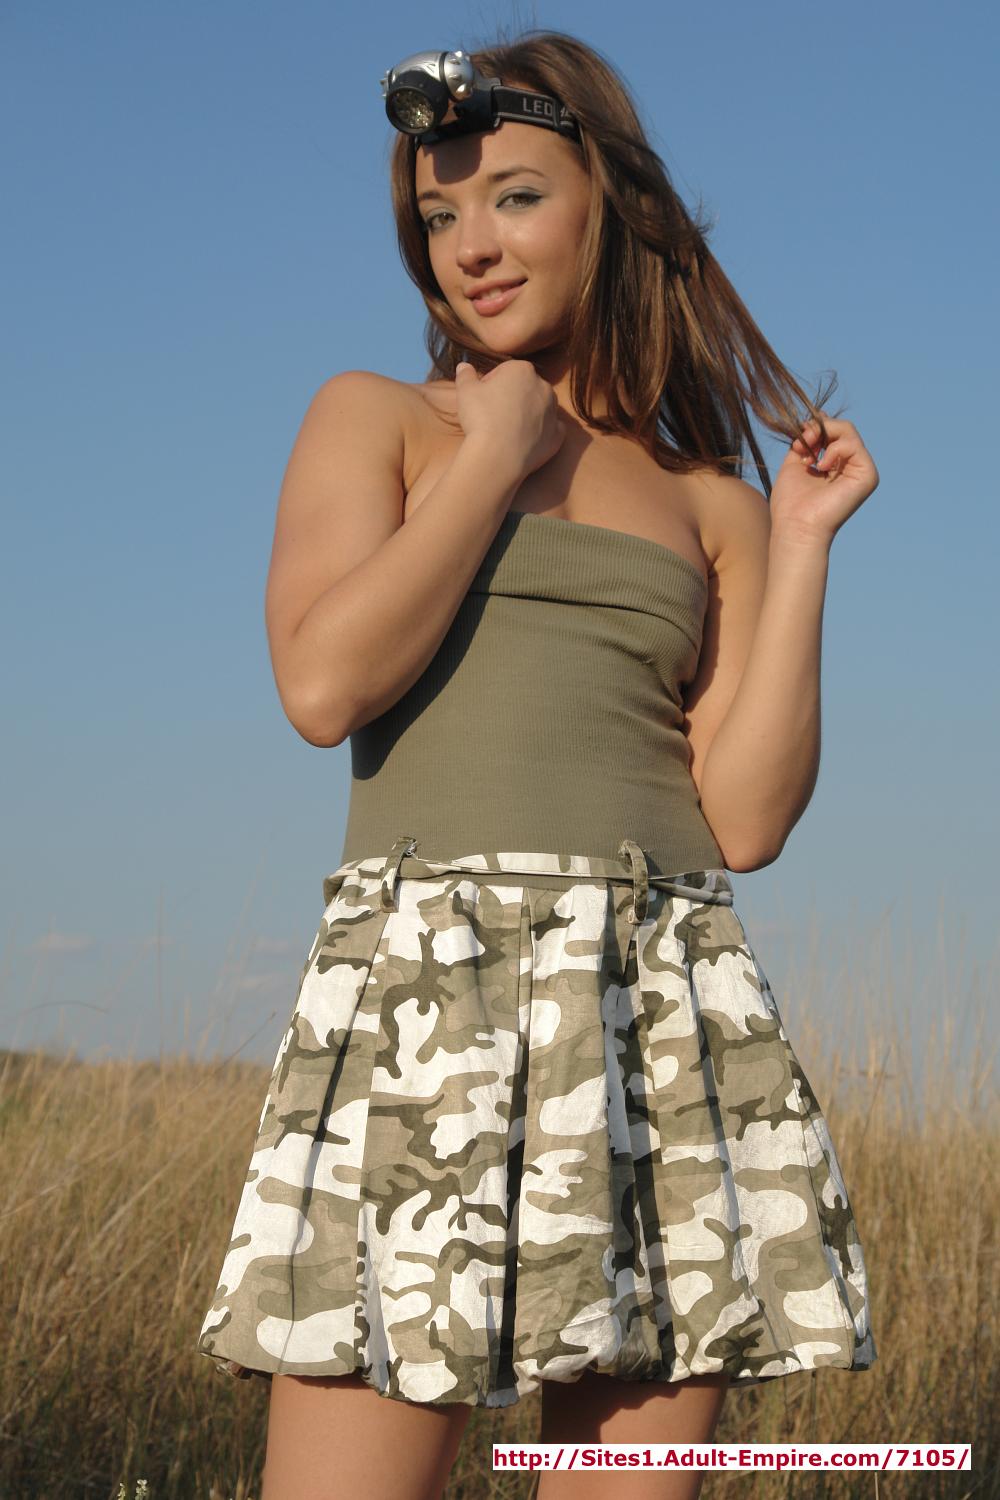 Teen Chick Getting Out From Her Military-styled Short Skirt And Spreading Wide